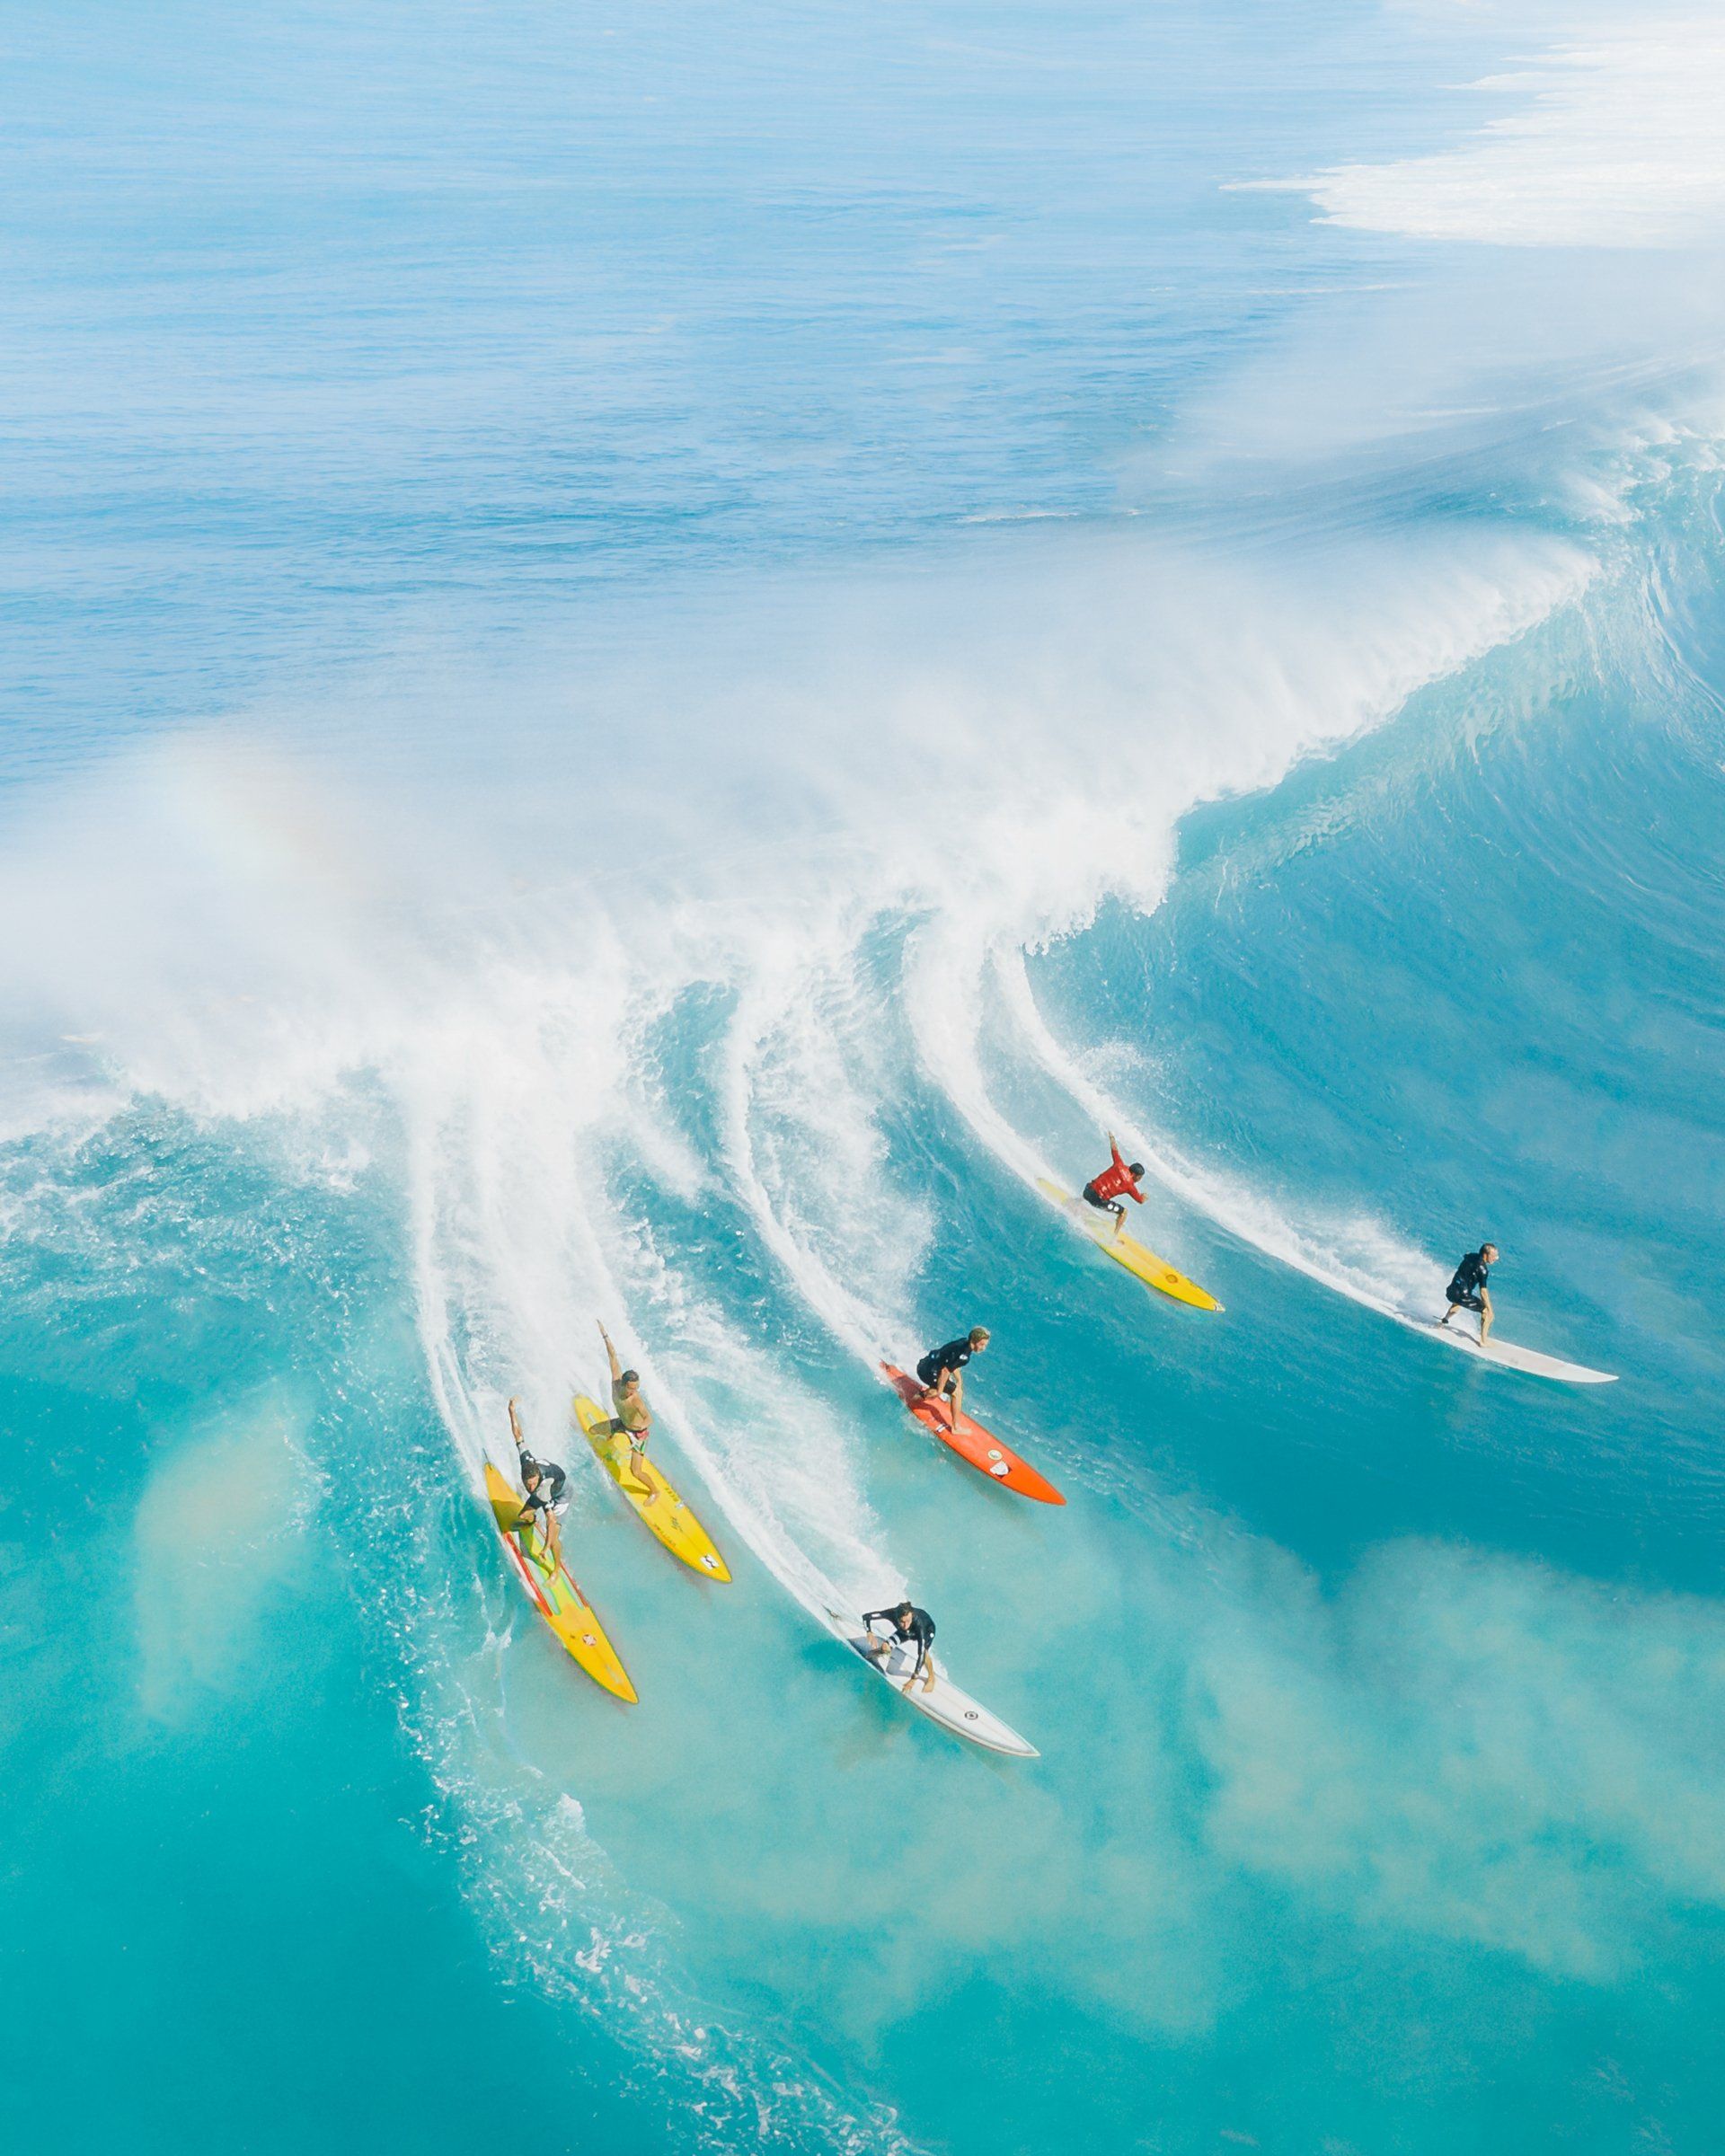 A group of surfers are riding a wave in the ocean.